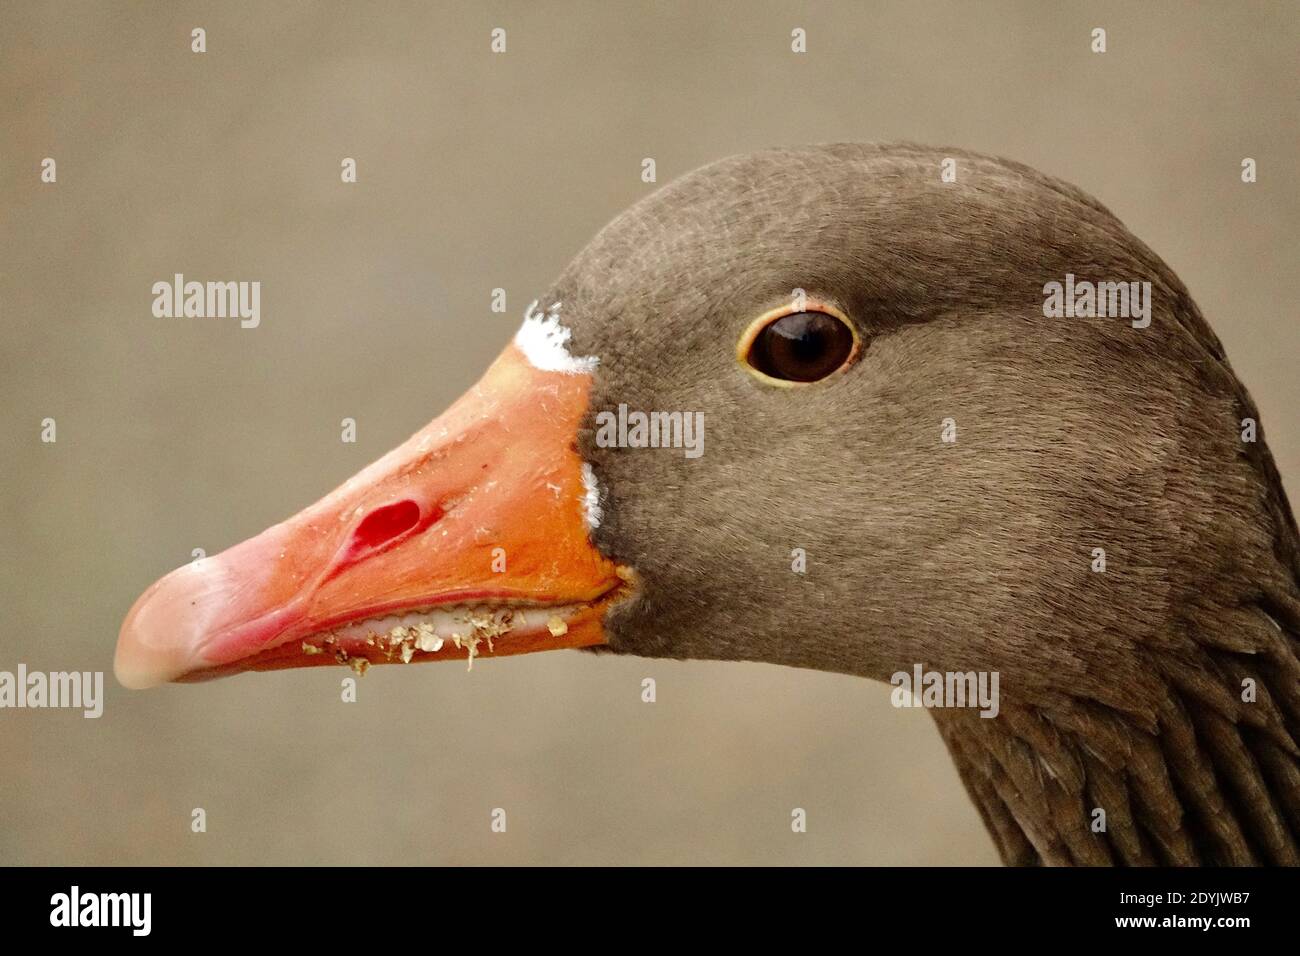 Closeup headshot of a Greylag Goose, Anser anser, a member of a large geese family of waterfowl. Urban wildlife found in a park in London. Stock Photo